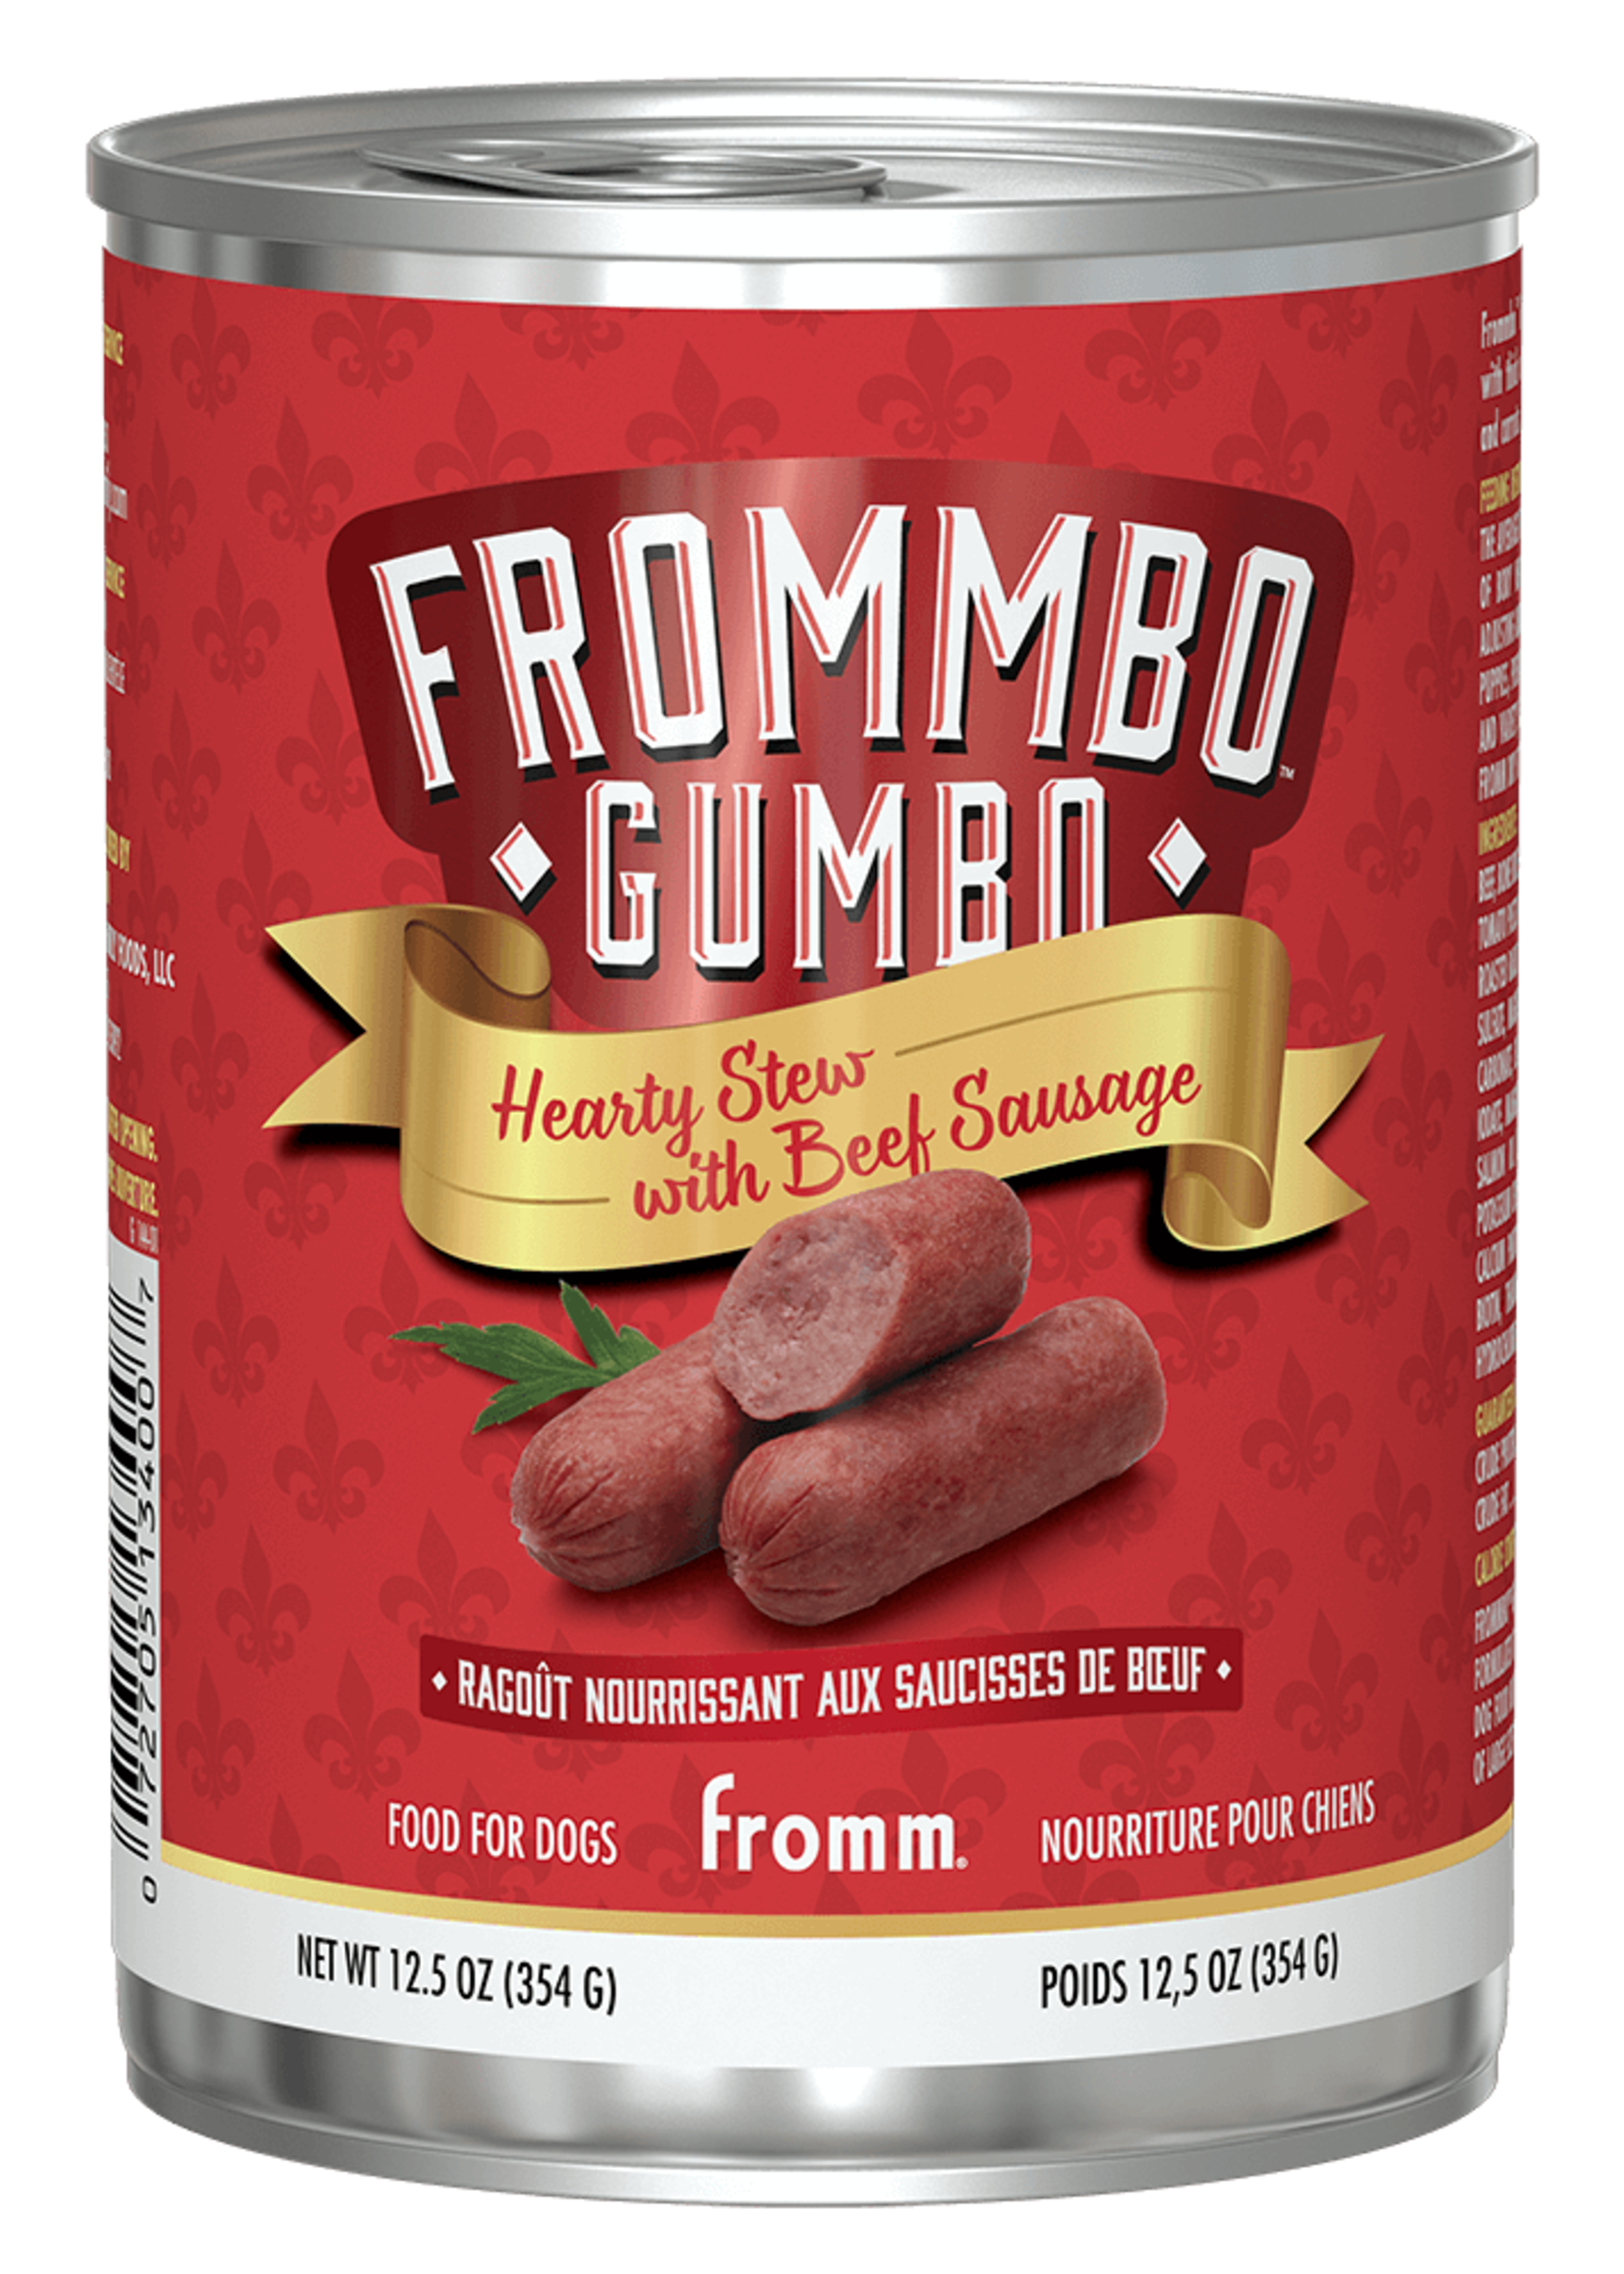 Fromm Family Pet Food Fromm Dog Frommbo Gumbo Hearty Stew w/ Beef Sausage 12.5 oz single